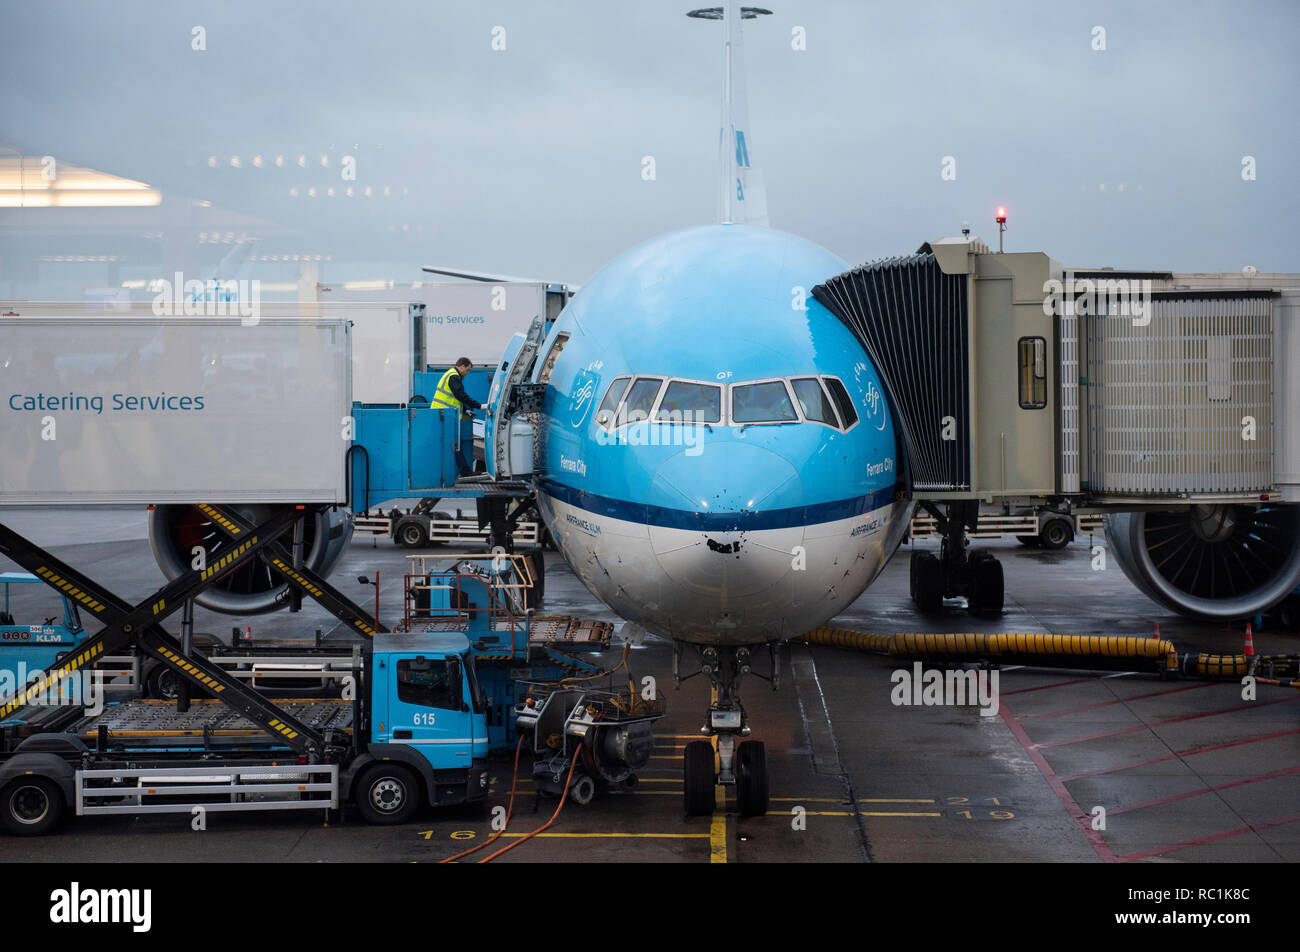 KLM Royal Dutch Airlines plane is seen at Amsterdam Schiphol Airport runway. Stock Photo